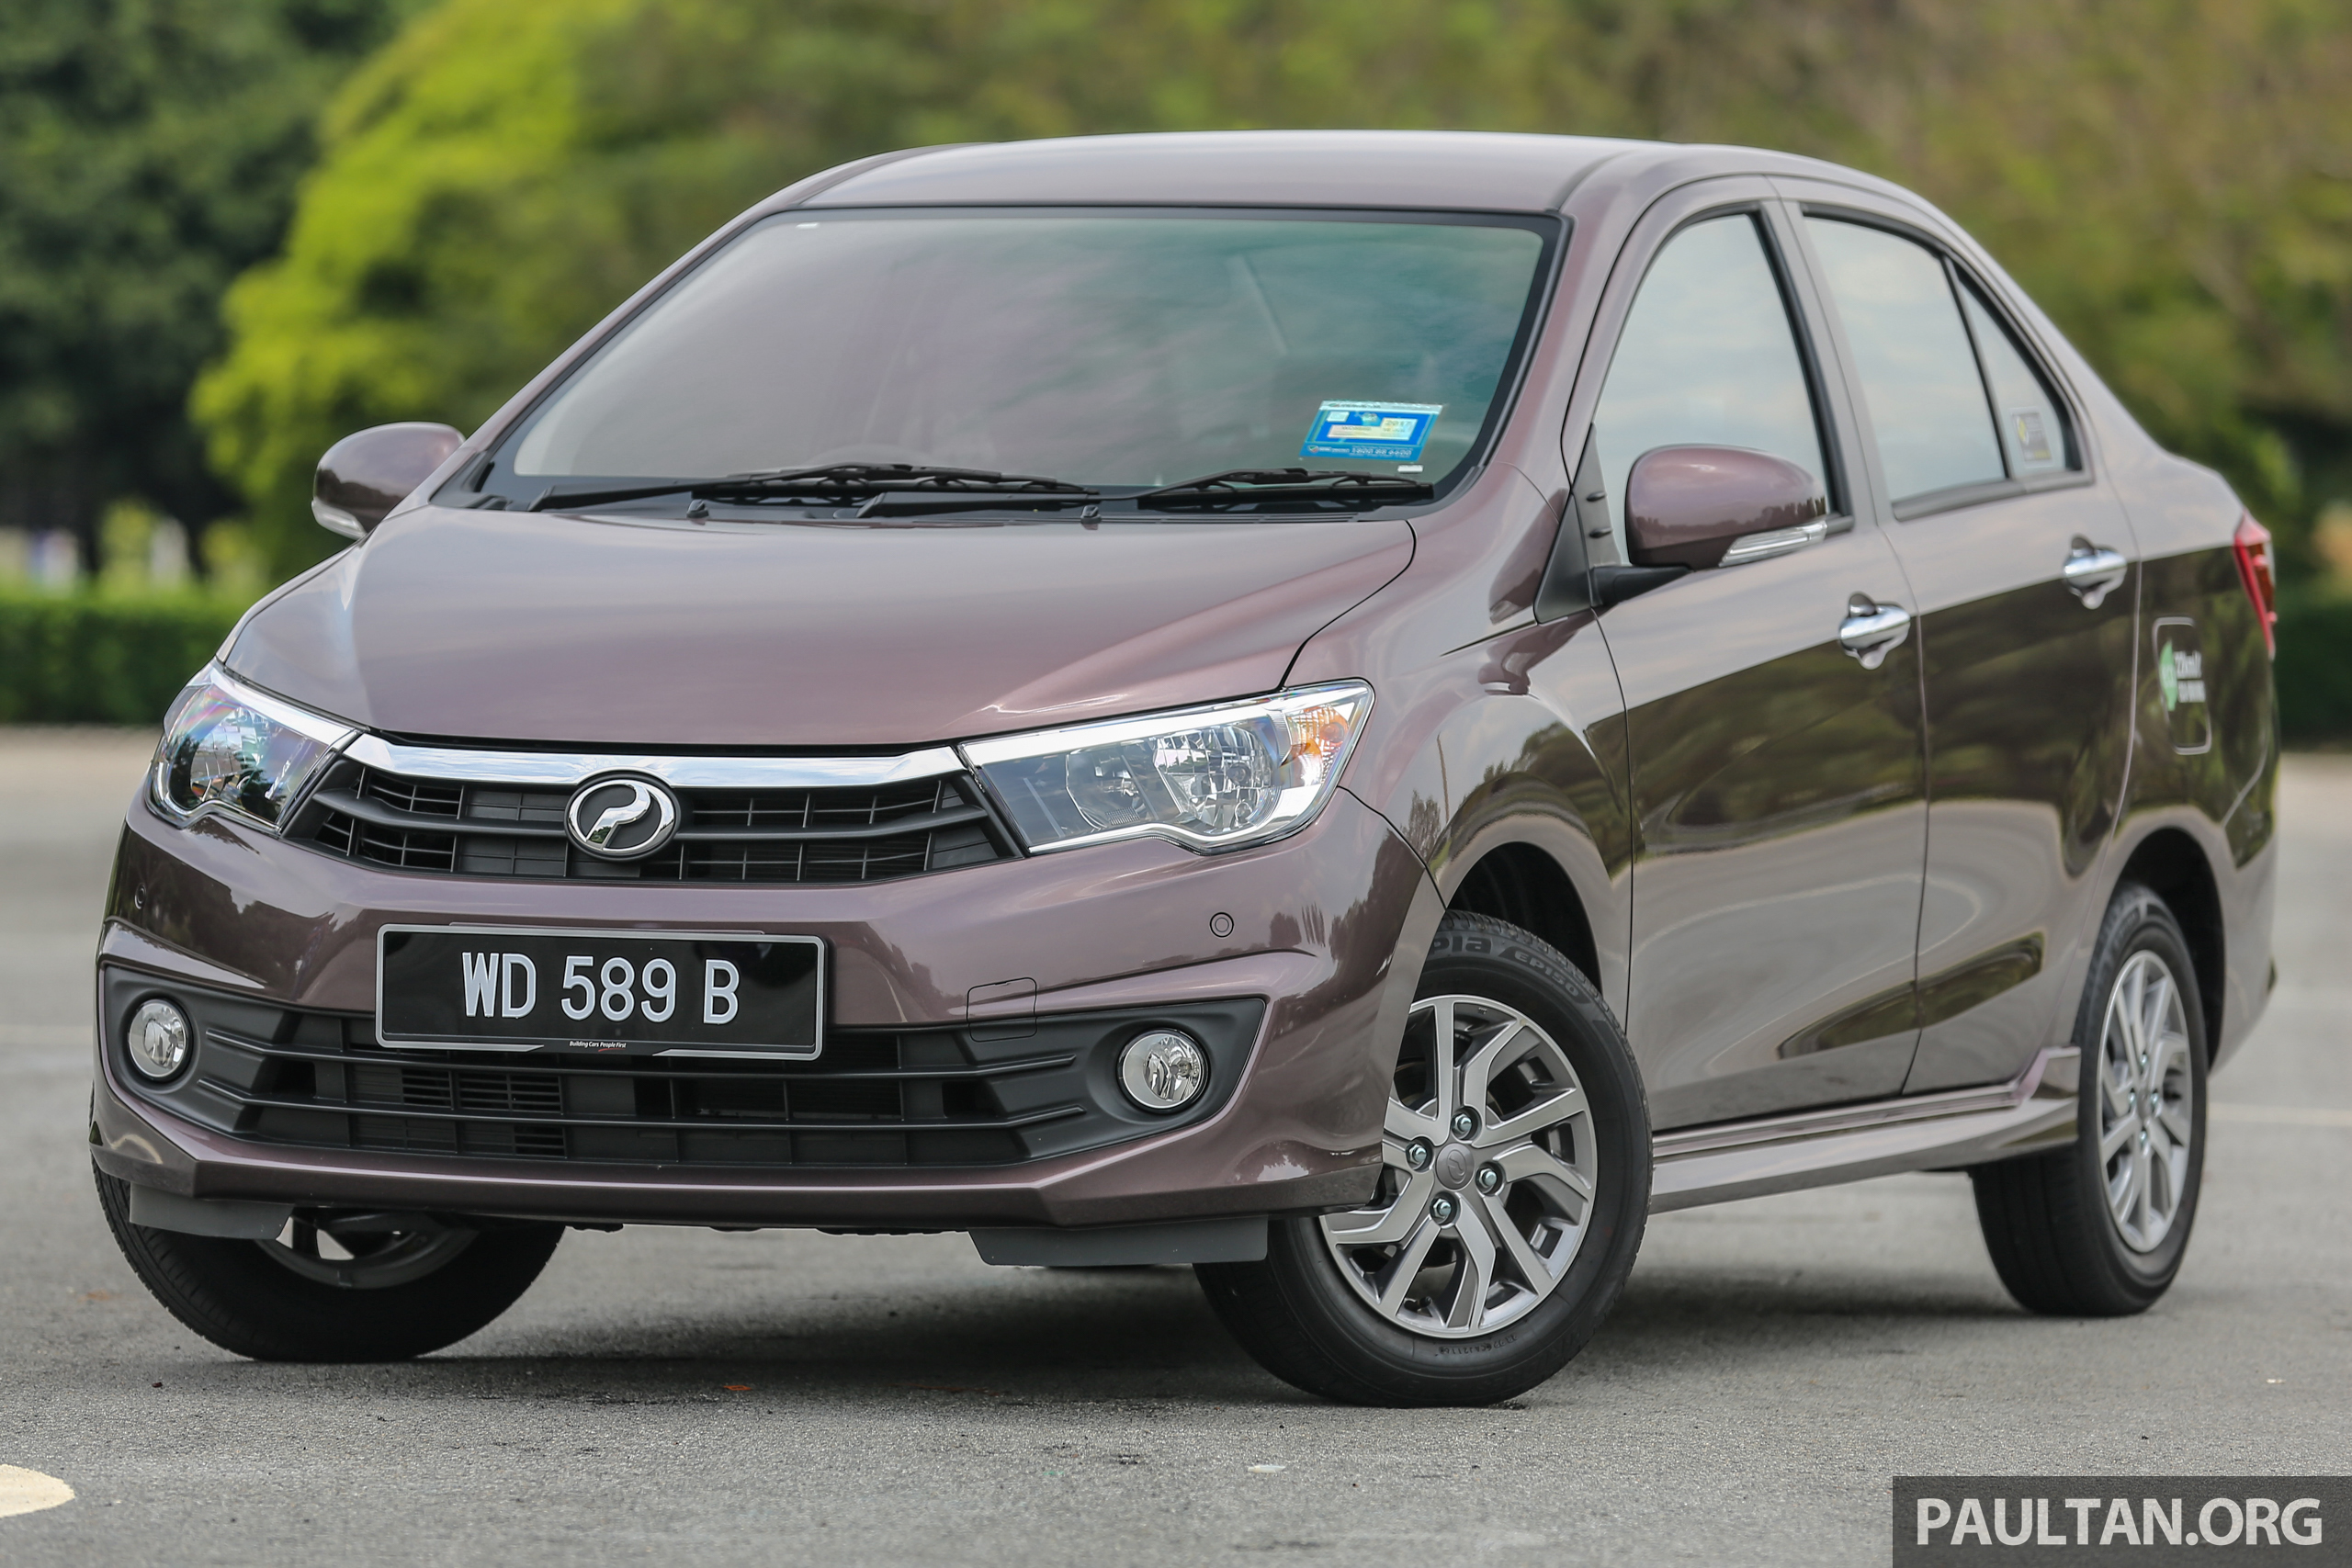 Perodua unable to install ESC on current models, except 